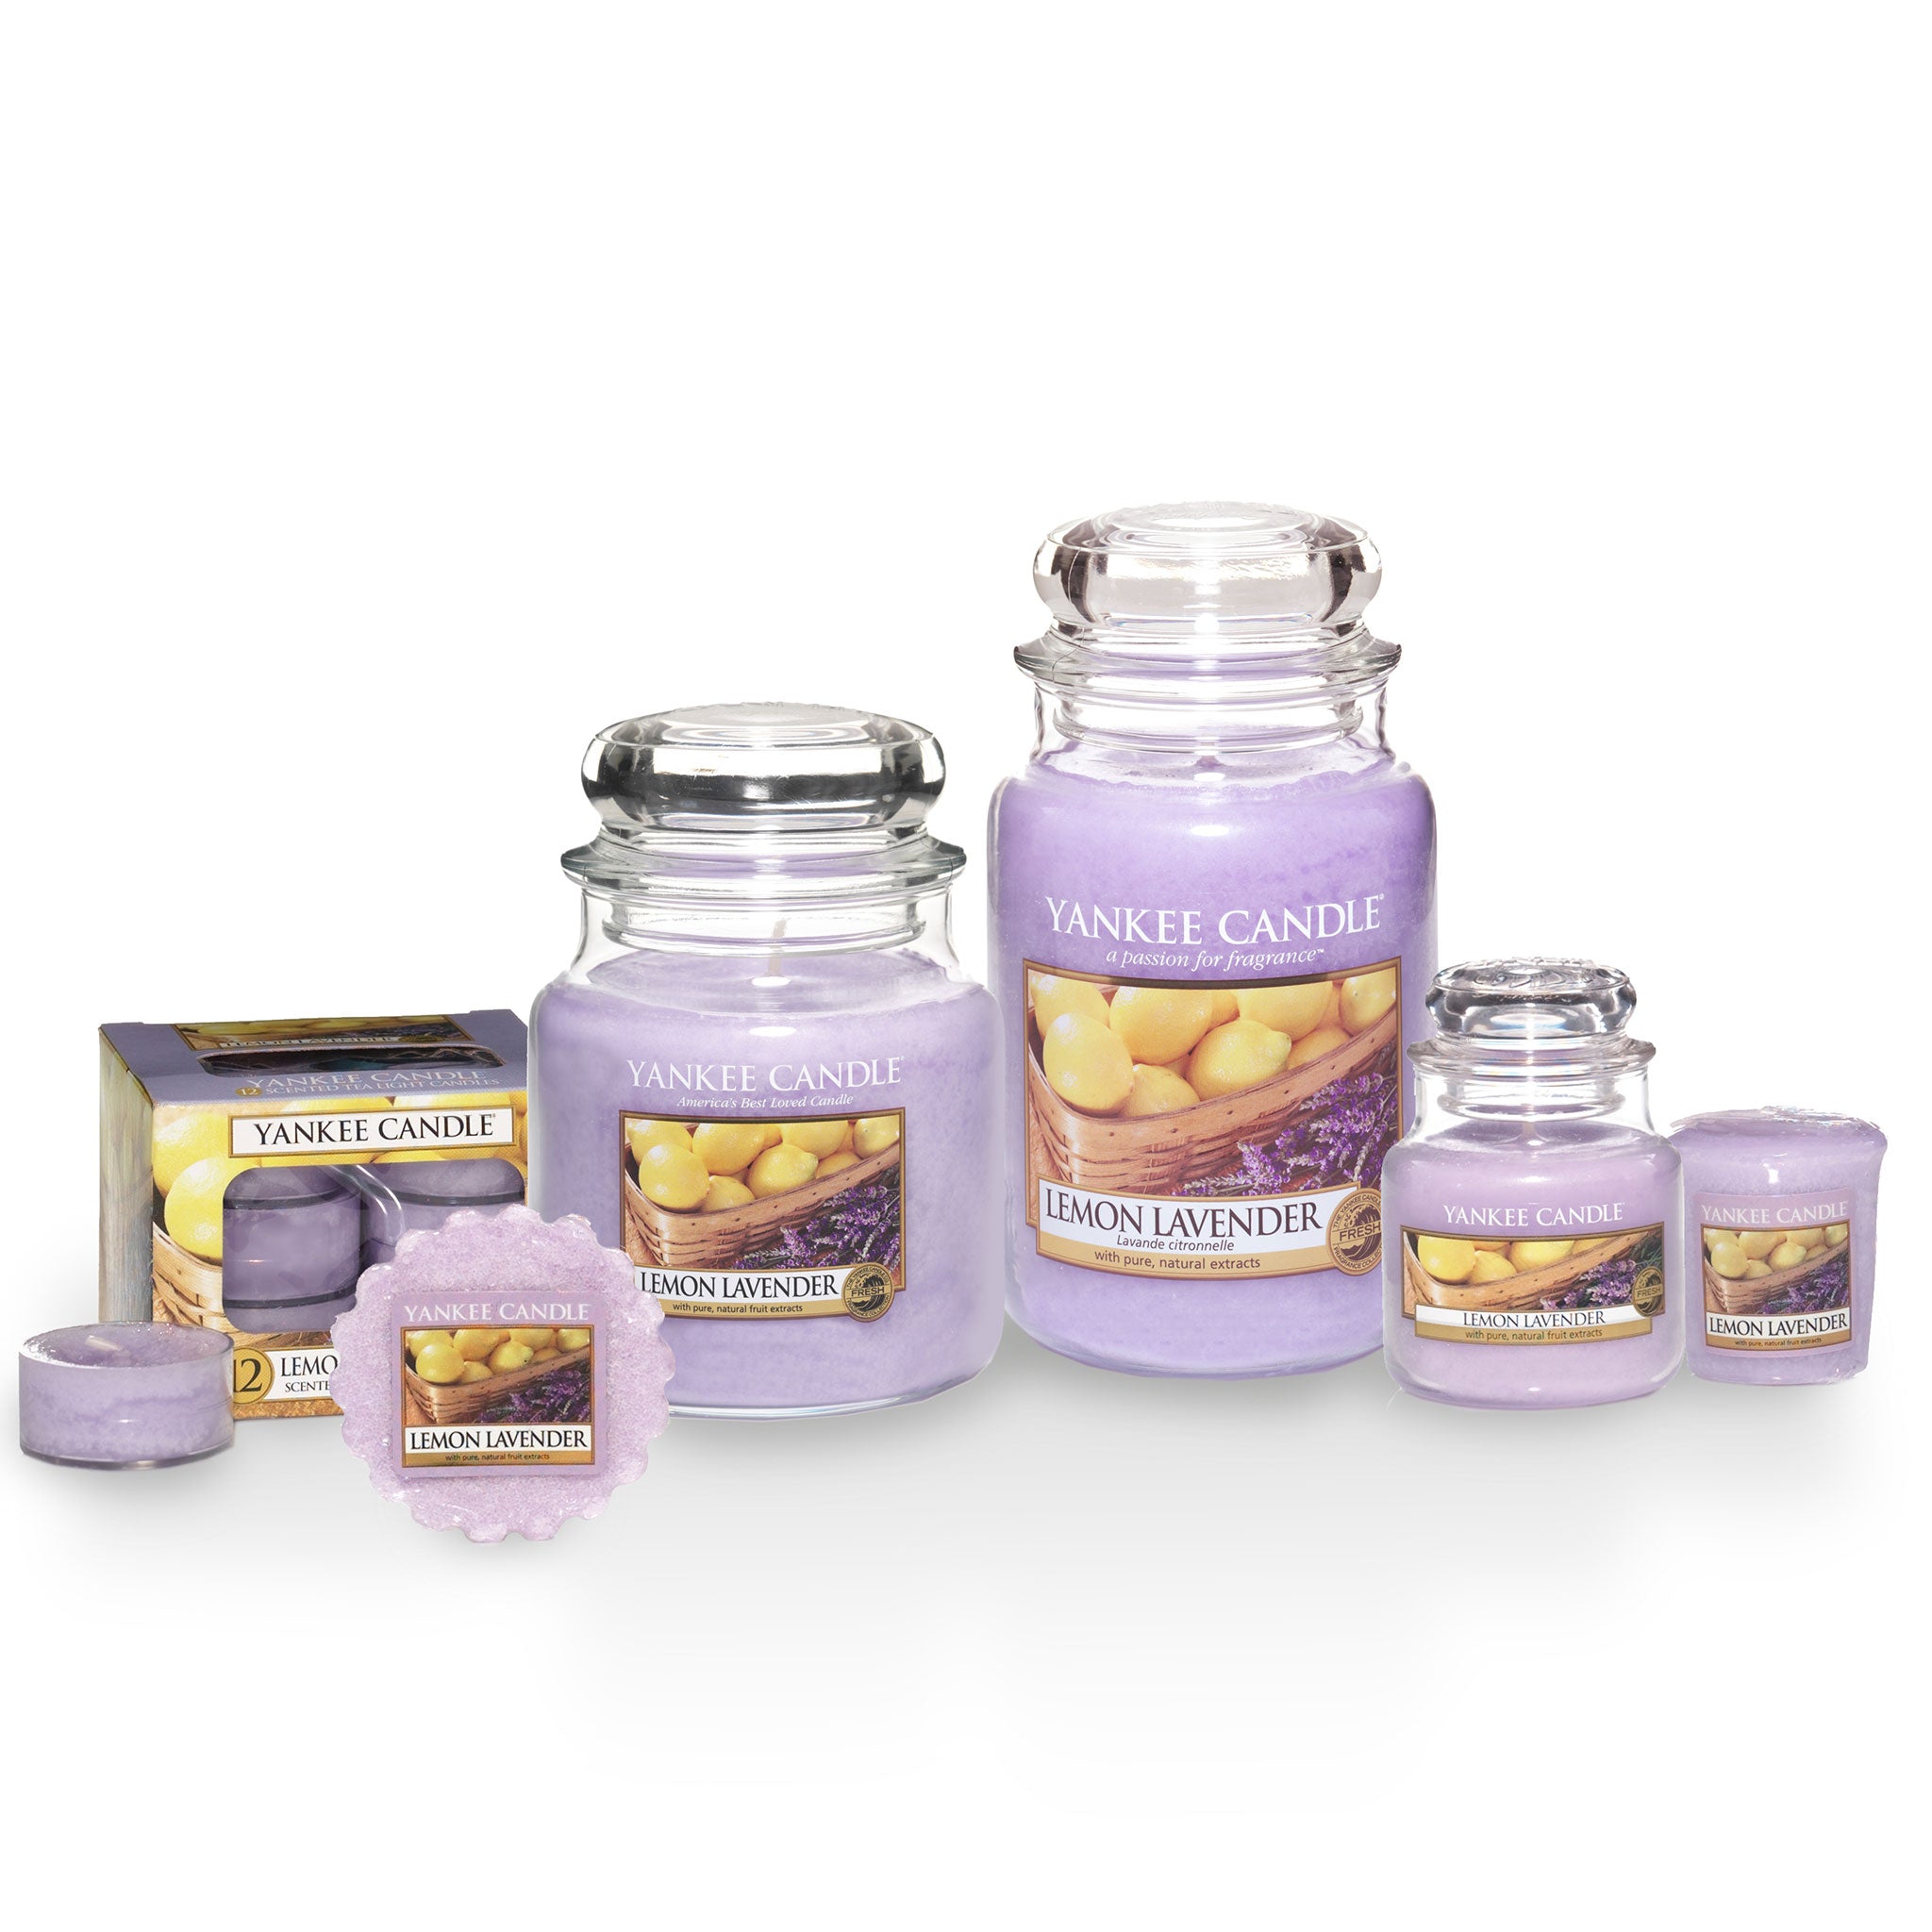 LEMON LAVENDER -Yankee Candle- Tea Light – Candle With Care